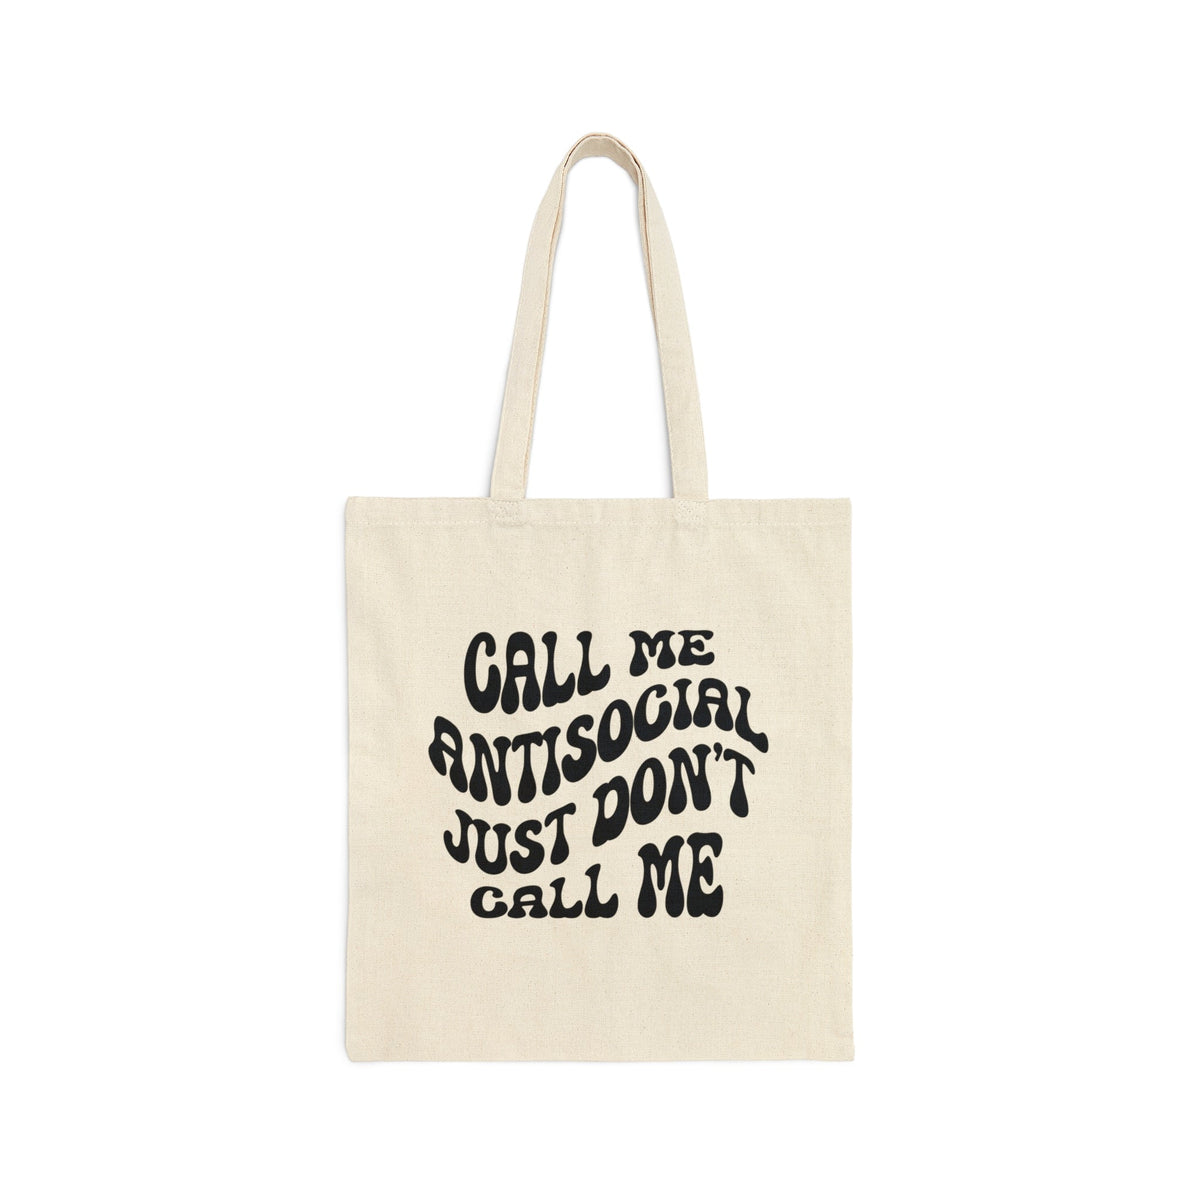 Call Me Antisocial Just Don't Call Me Tote | Funny Canvas Bag Bags TheFringeCultureCollective